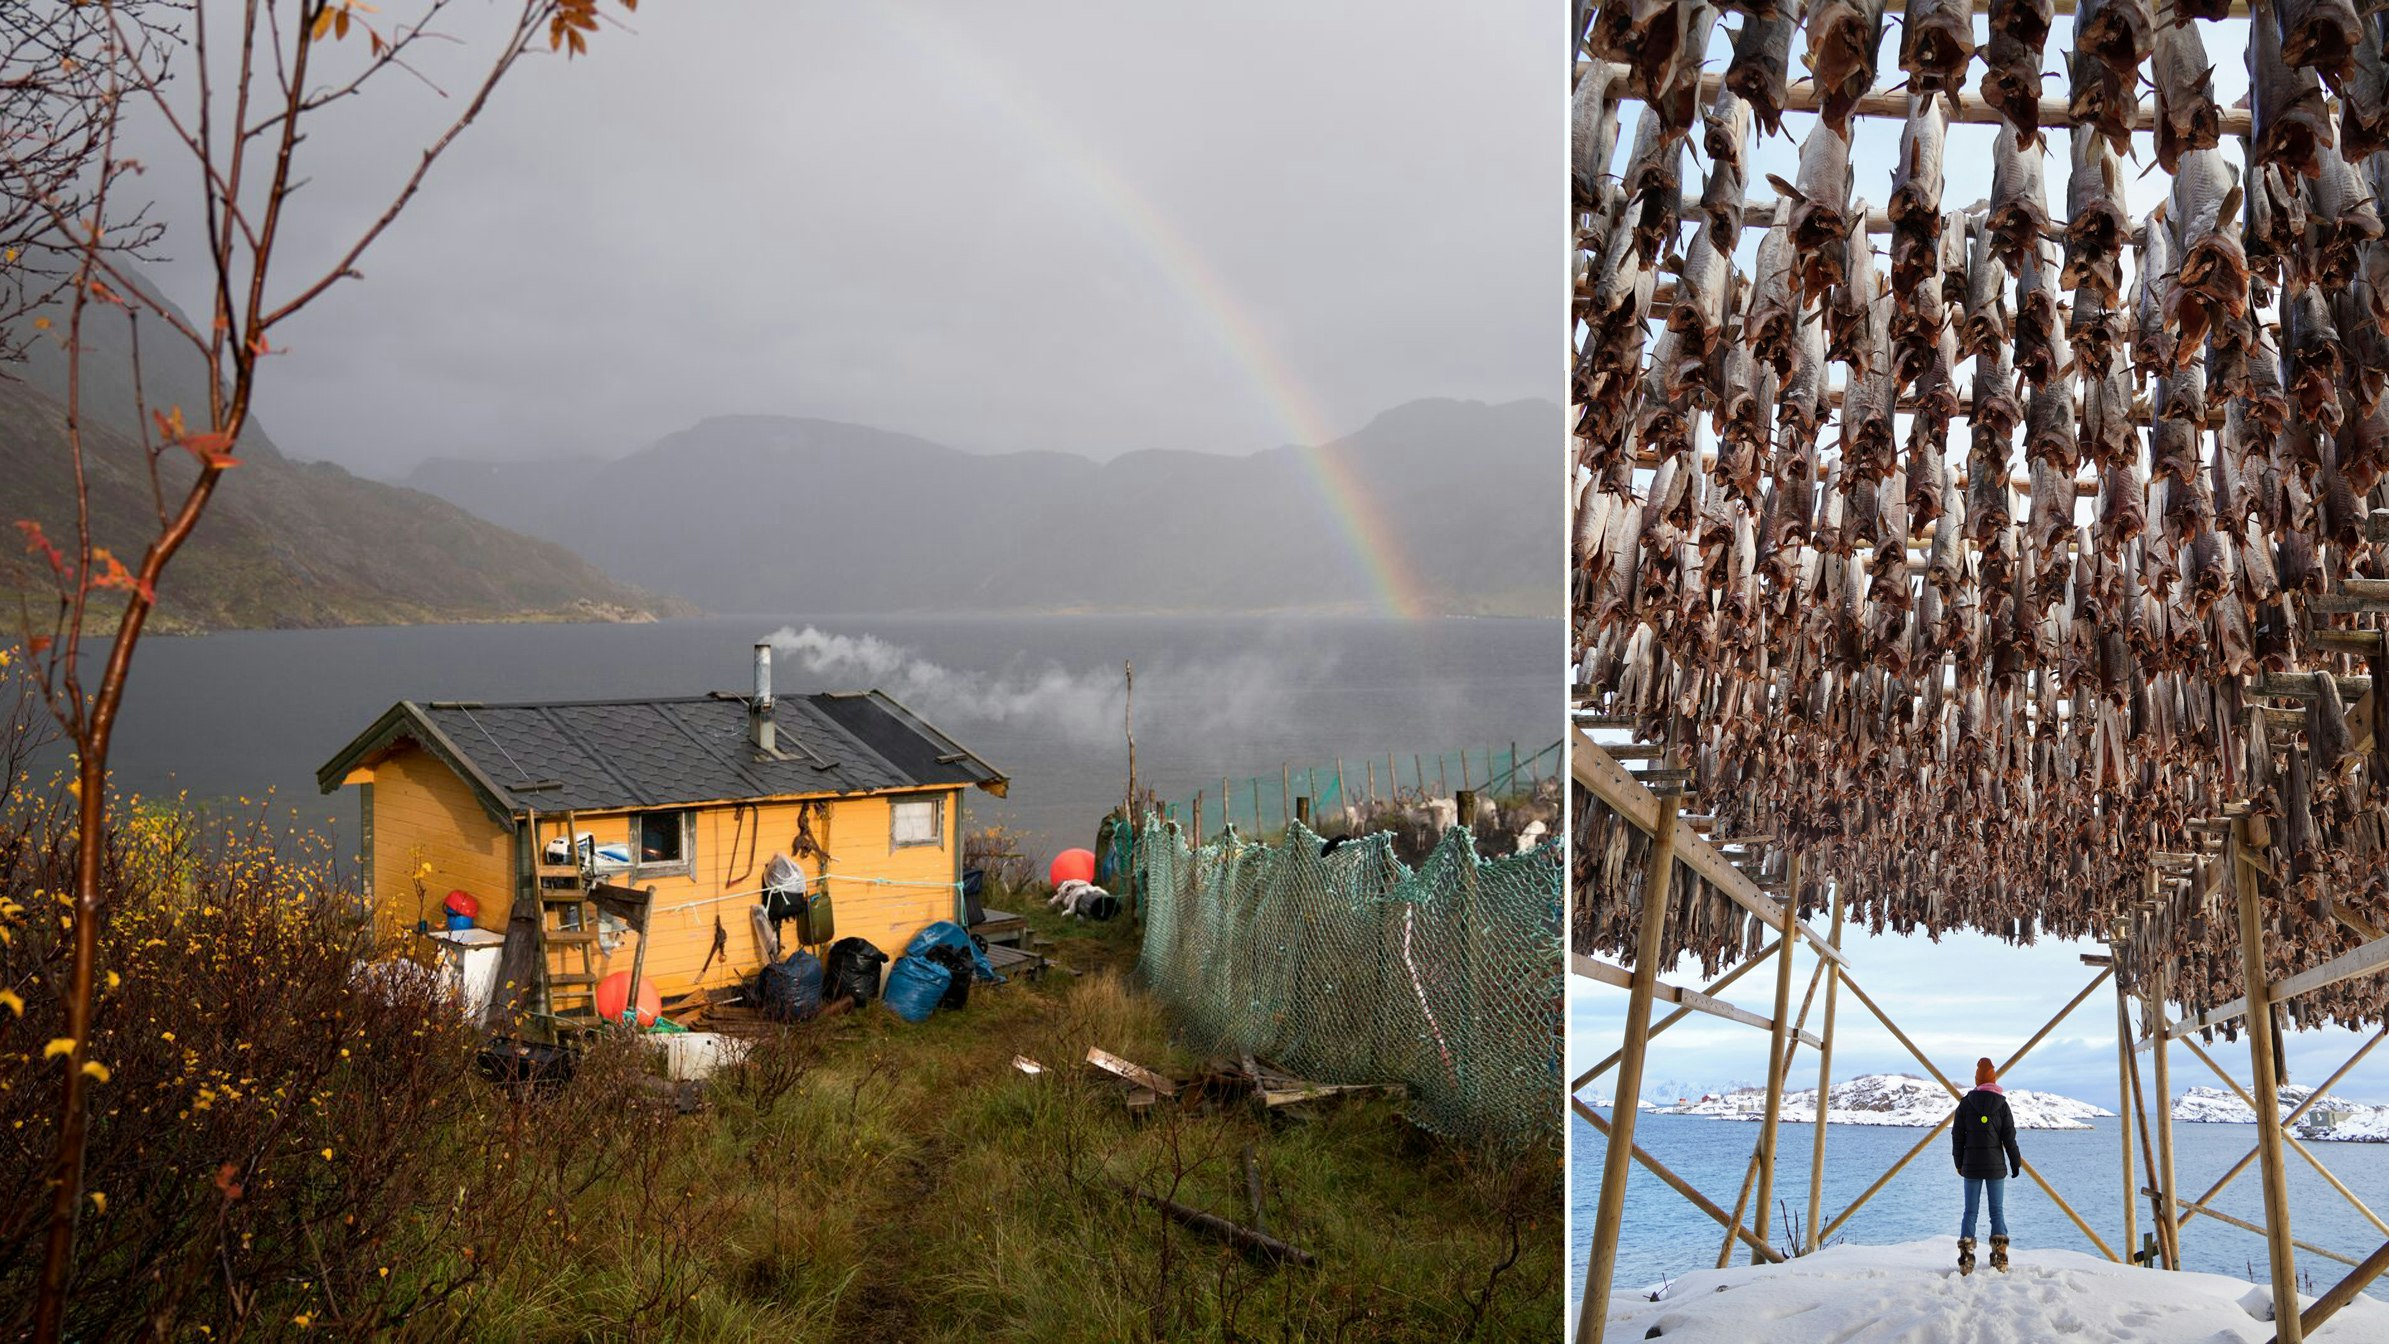 Left: A cabin under a rainbow in Autumn weather; Right: A woman stands under a rack drying fish.